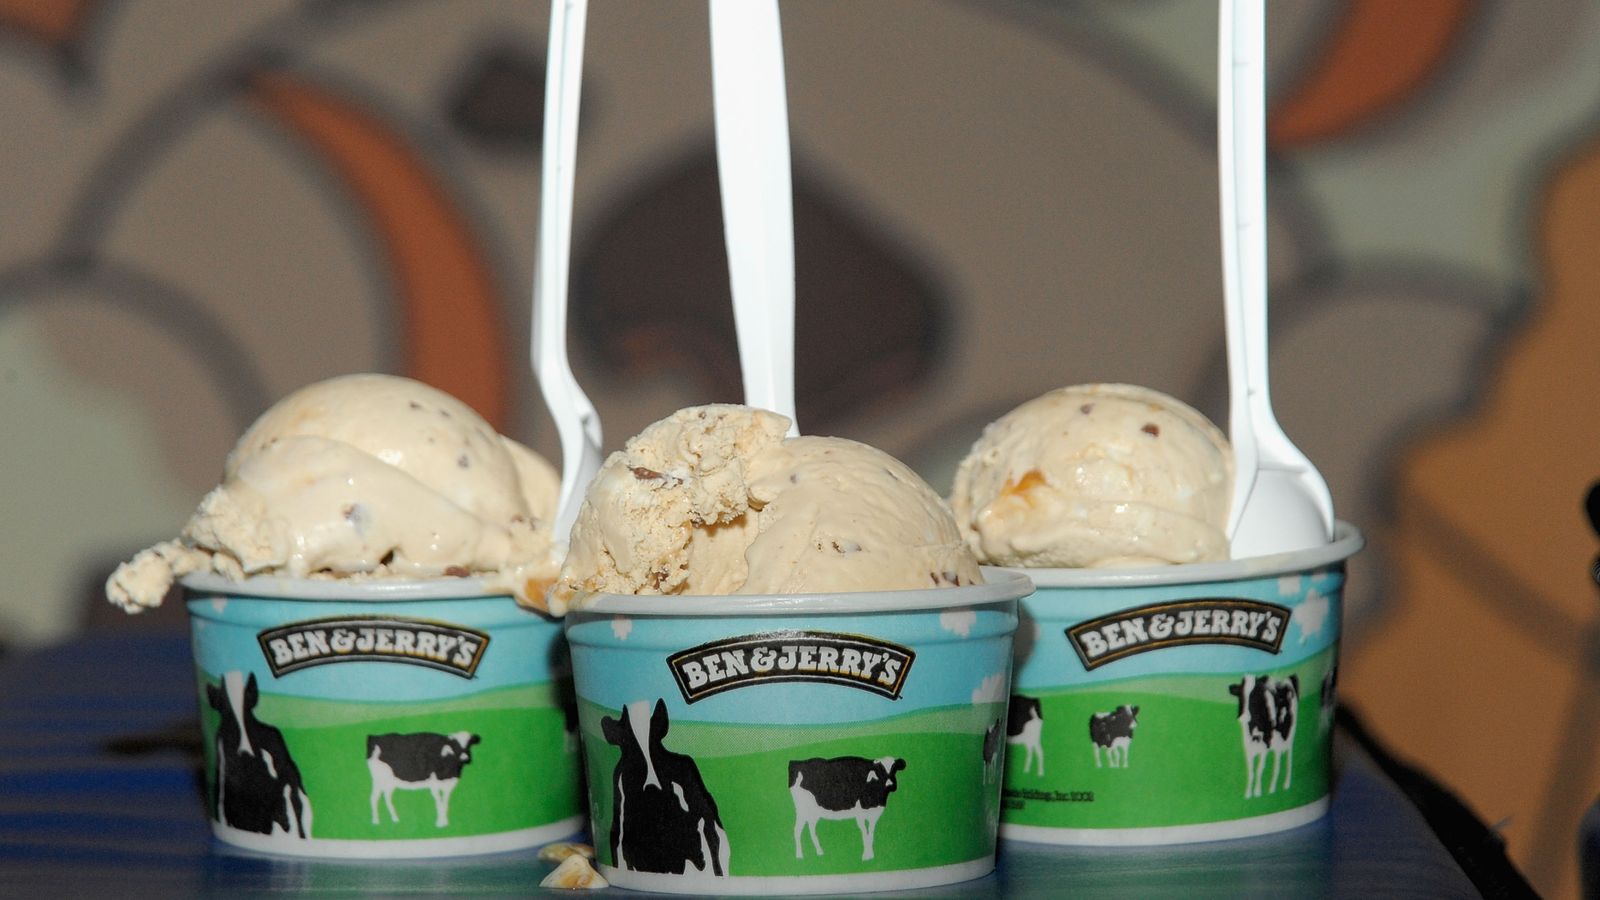 the Ben & Jerry's and Bonnaroo - new flavor party at Bowery Ballroom on April 19, 2010 in New York City.